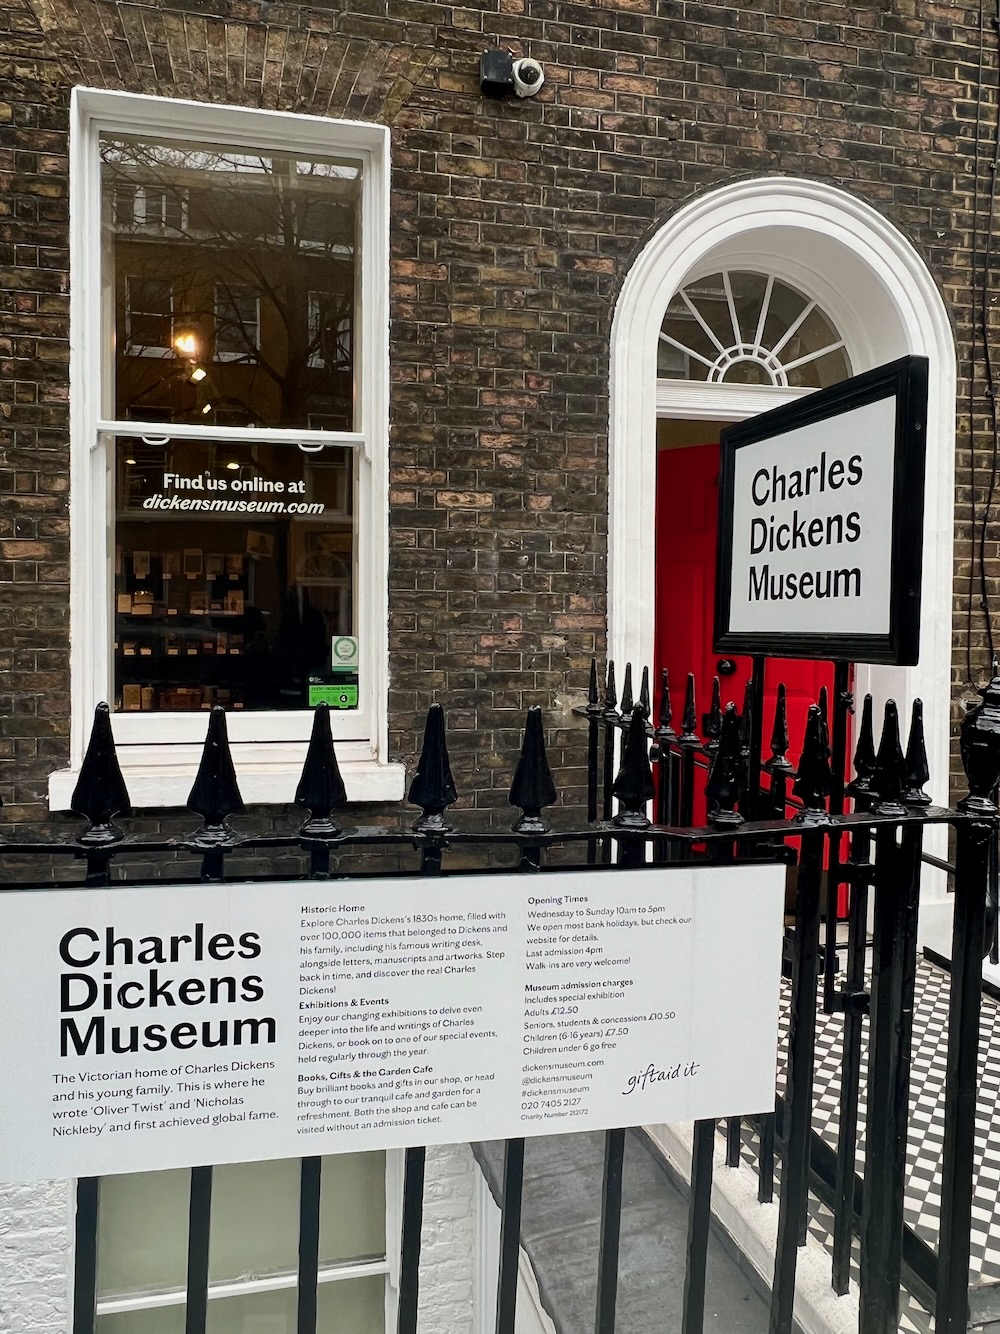 Entrance to Charles Dickens Museum in London. Photo Credit: © Ursula Petula Barzey.